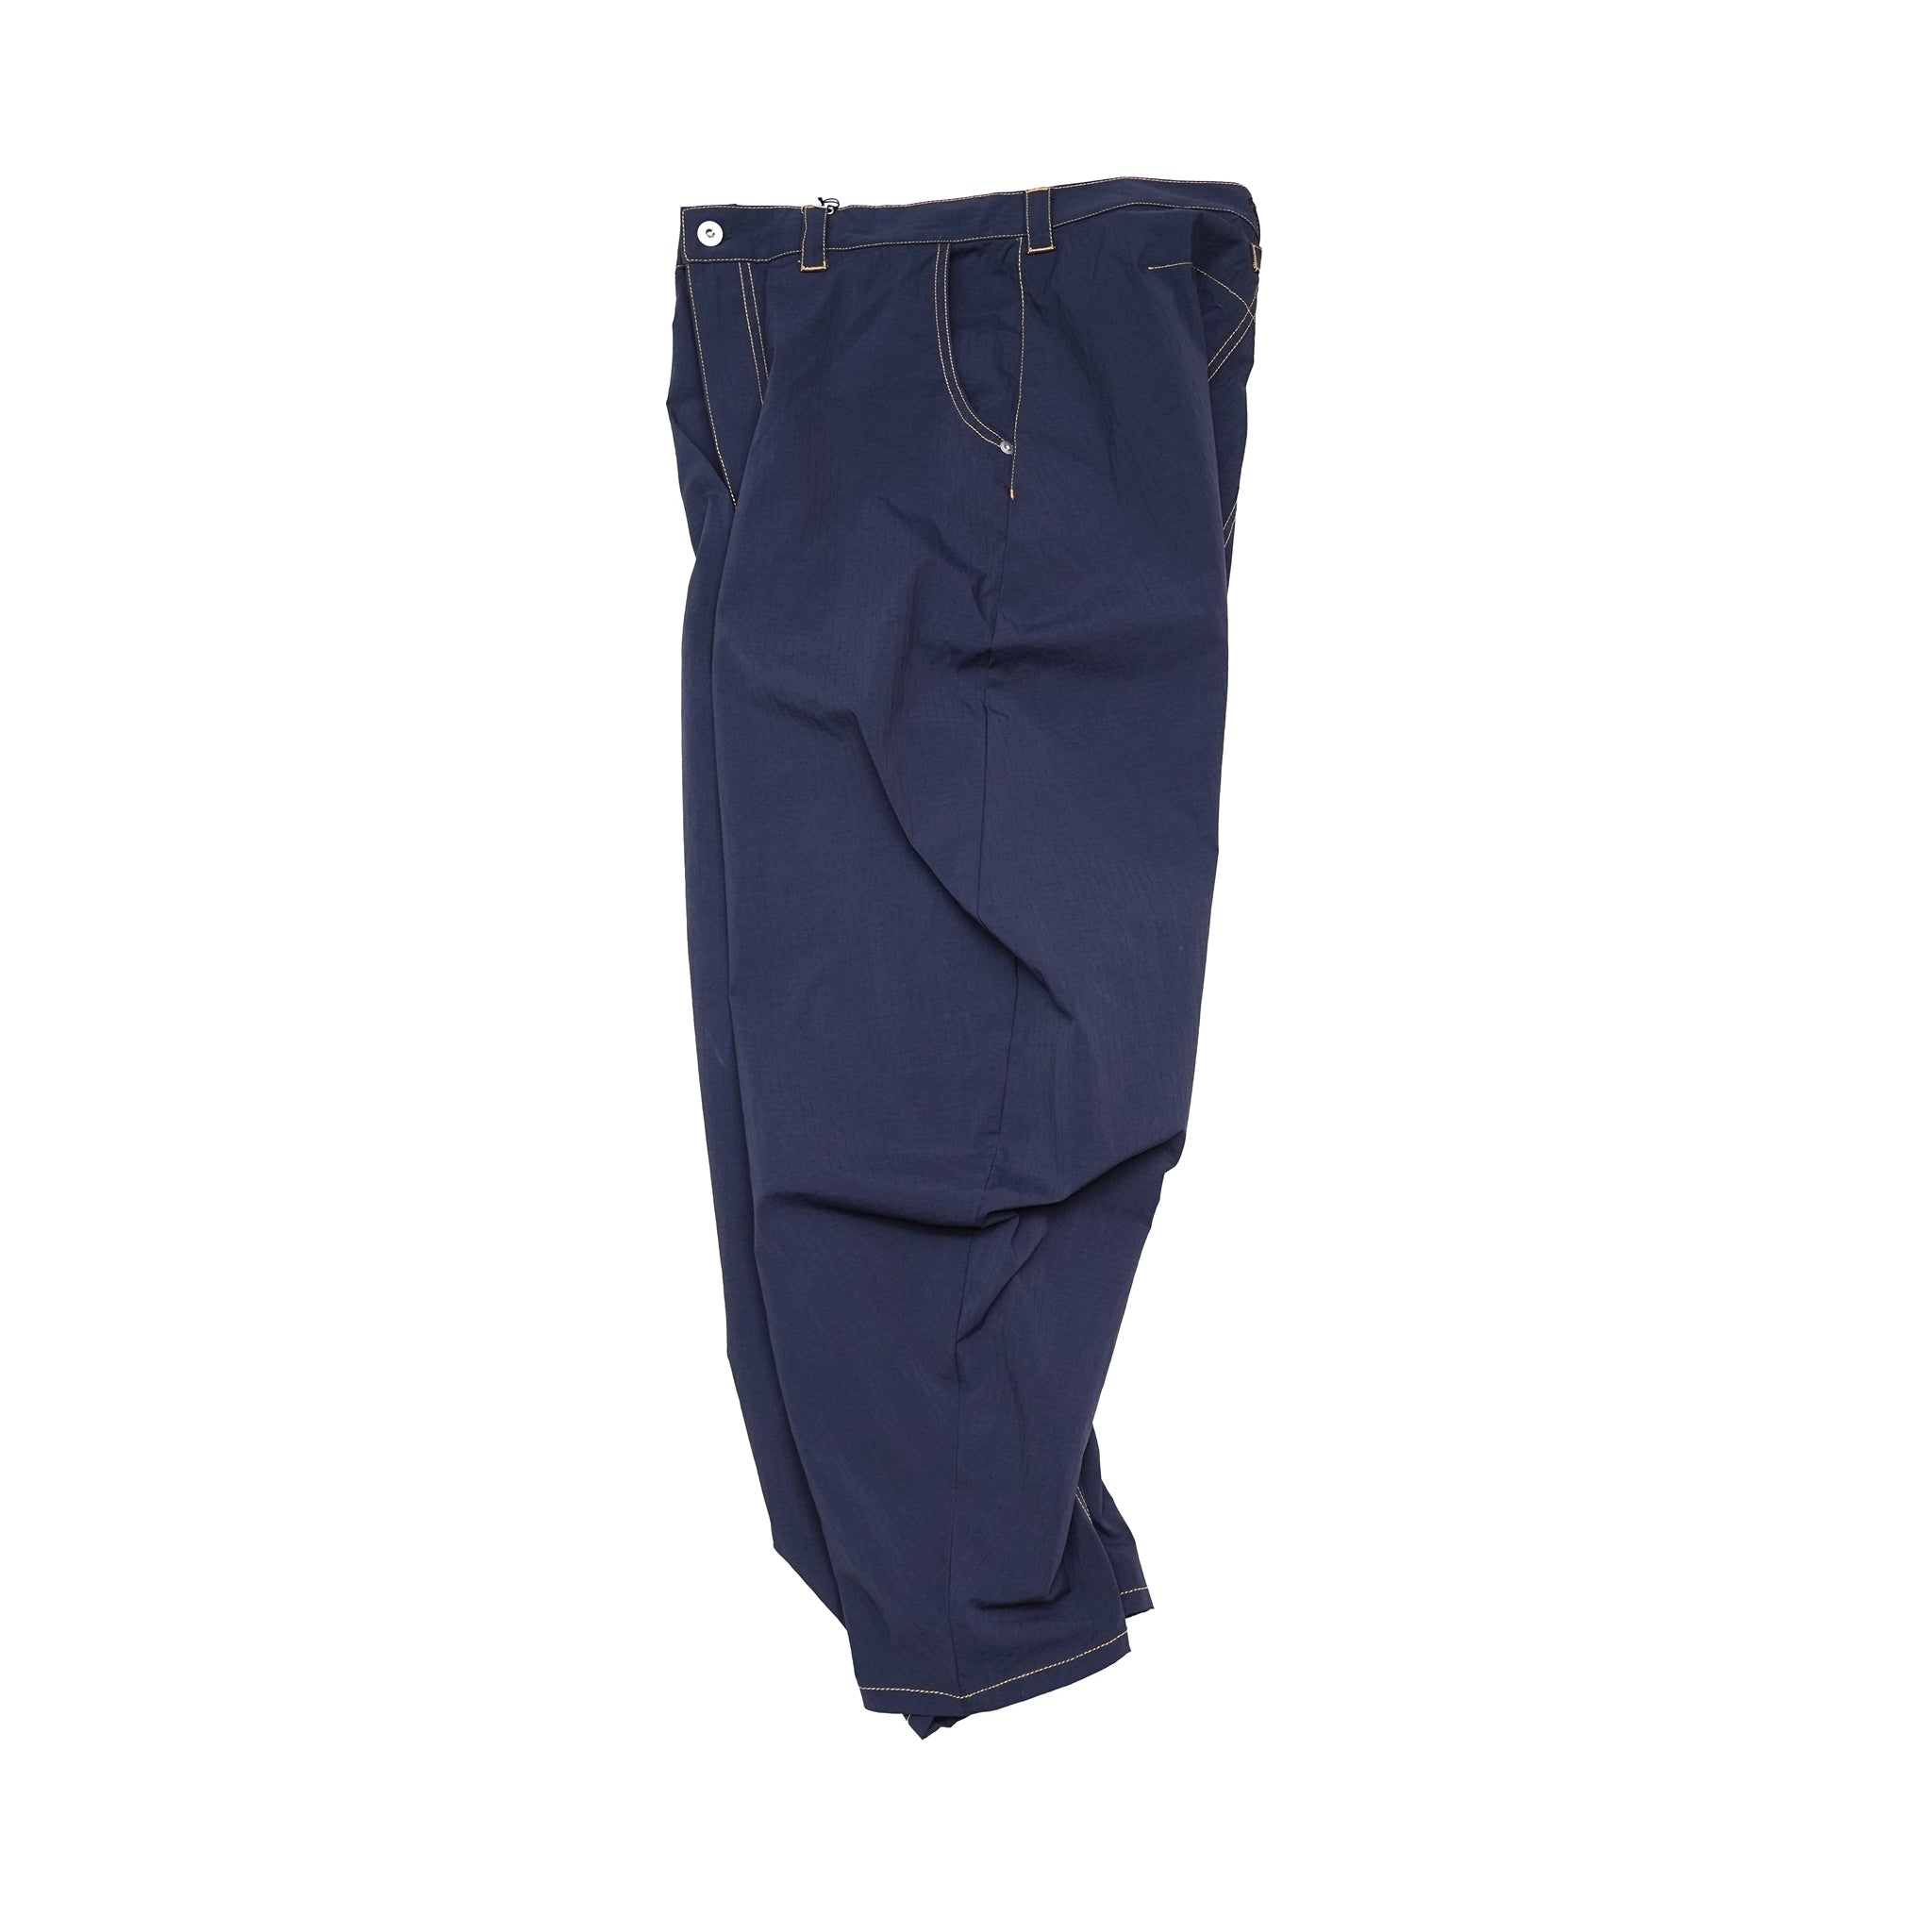 No:NV23AW-03a | Name:CORDURA® Comfort 3D Jeans | Color:Navy【NEYVOR_ネイバー】